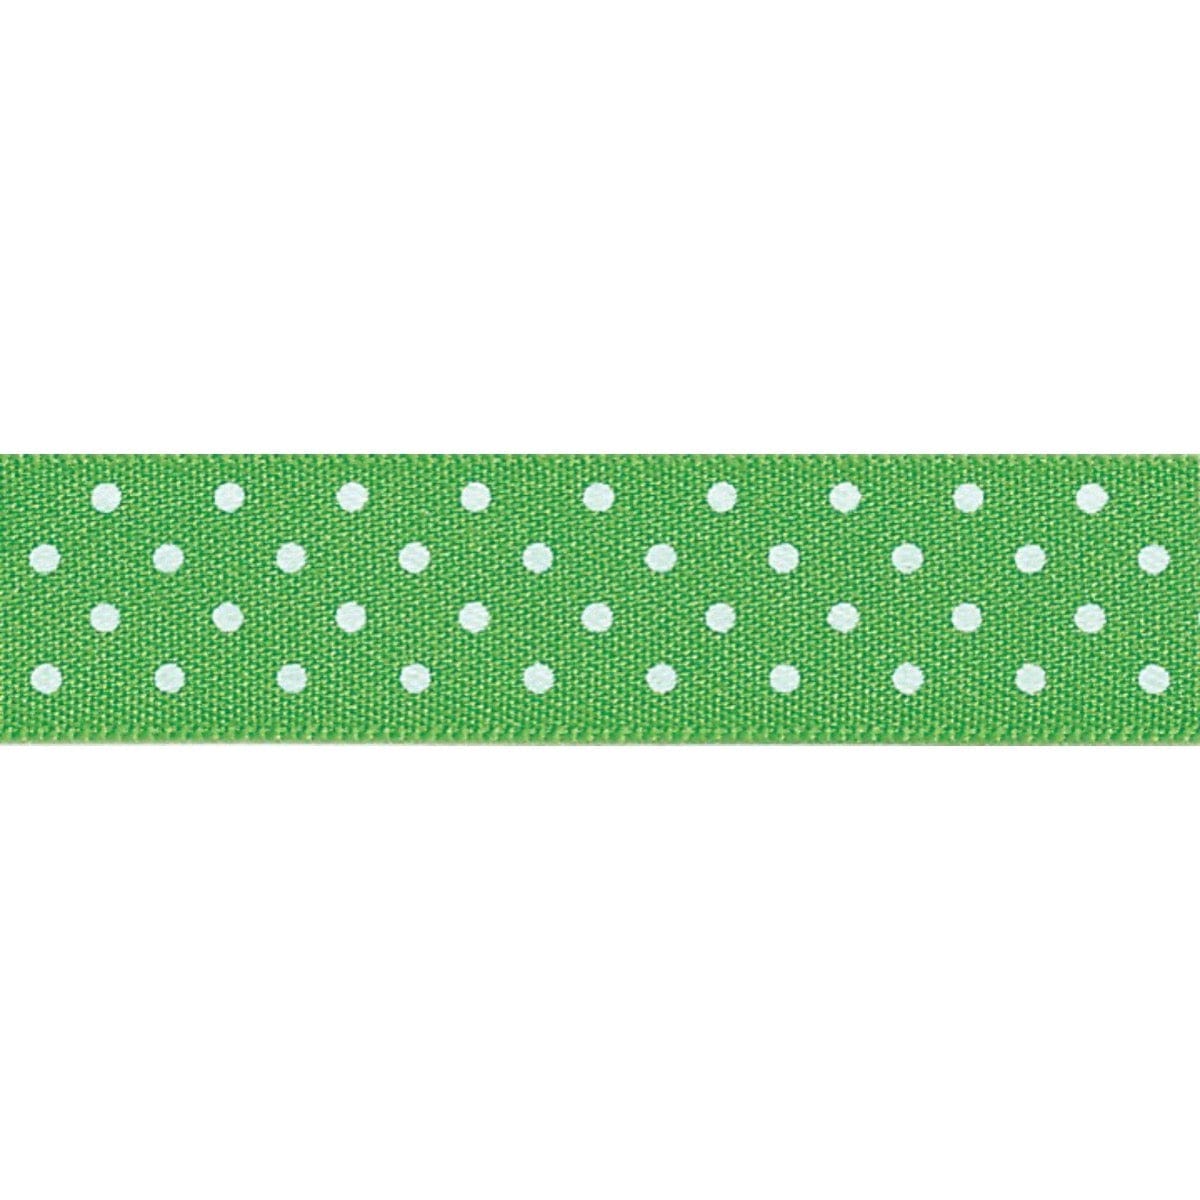 Micro Dot Ribbon: Meadow green and white: 15mm wide: Price per metre.